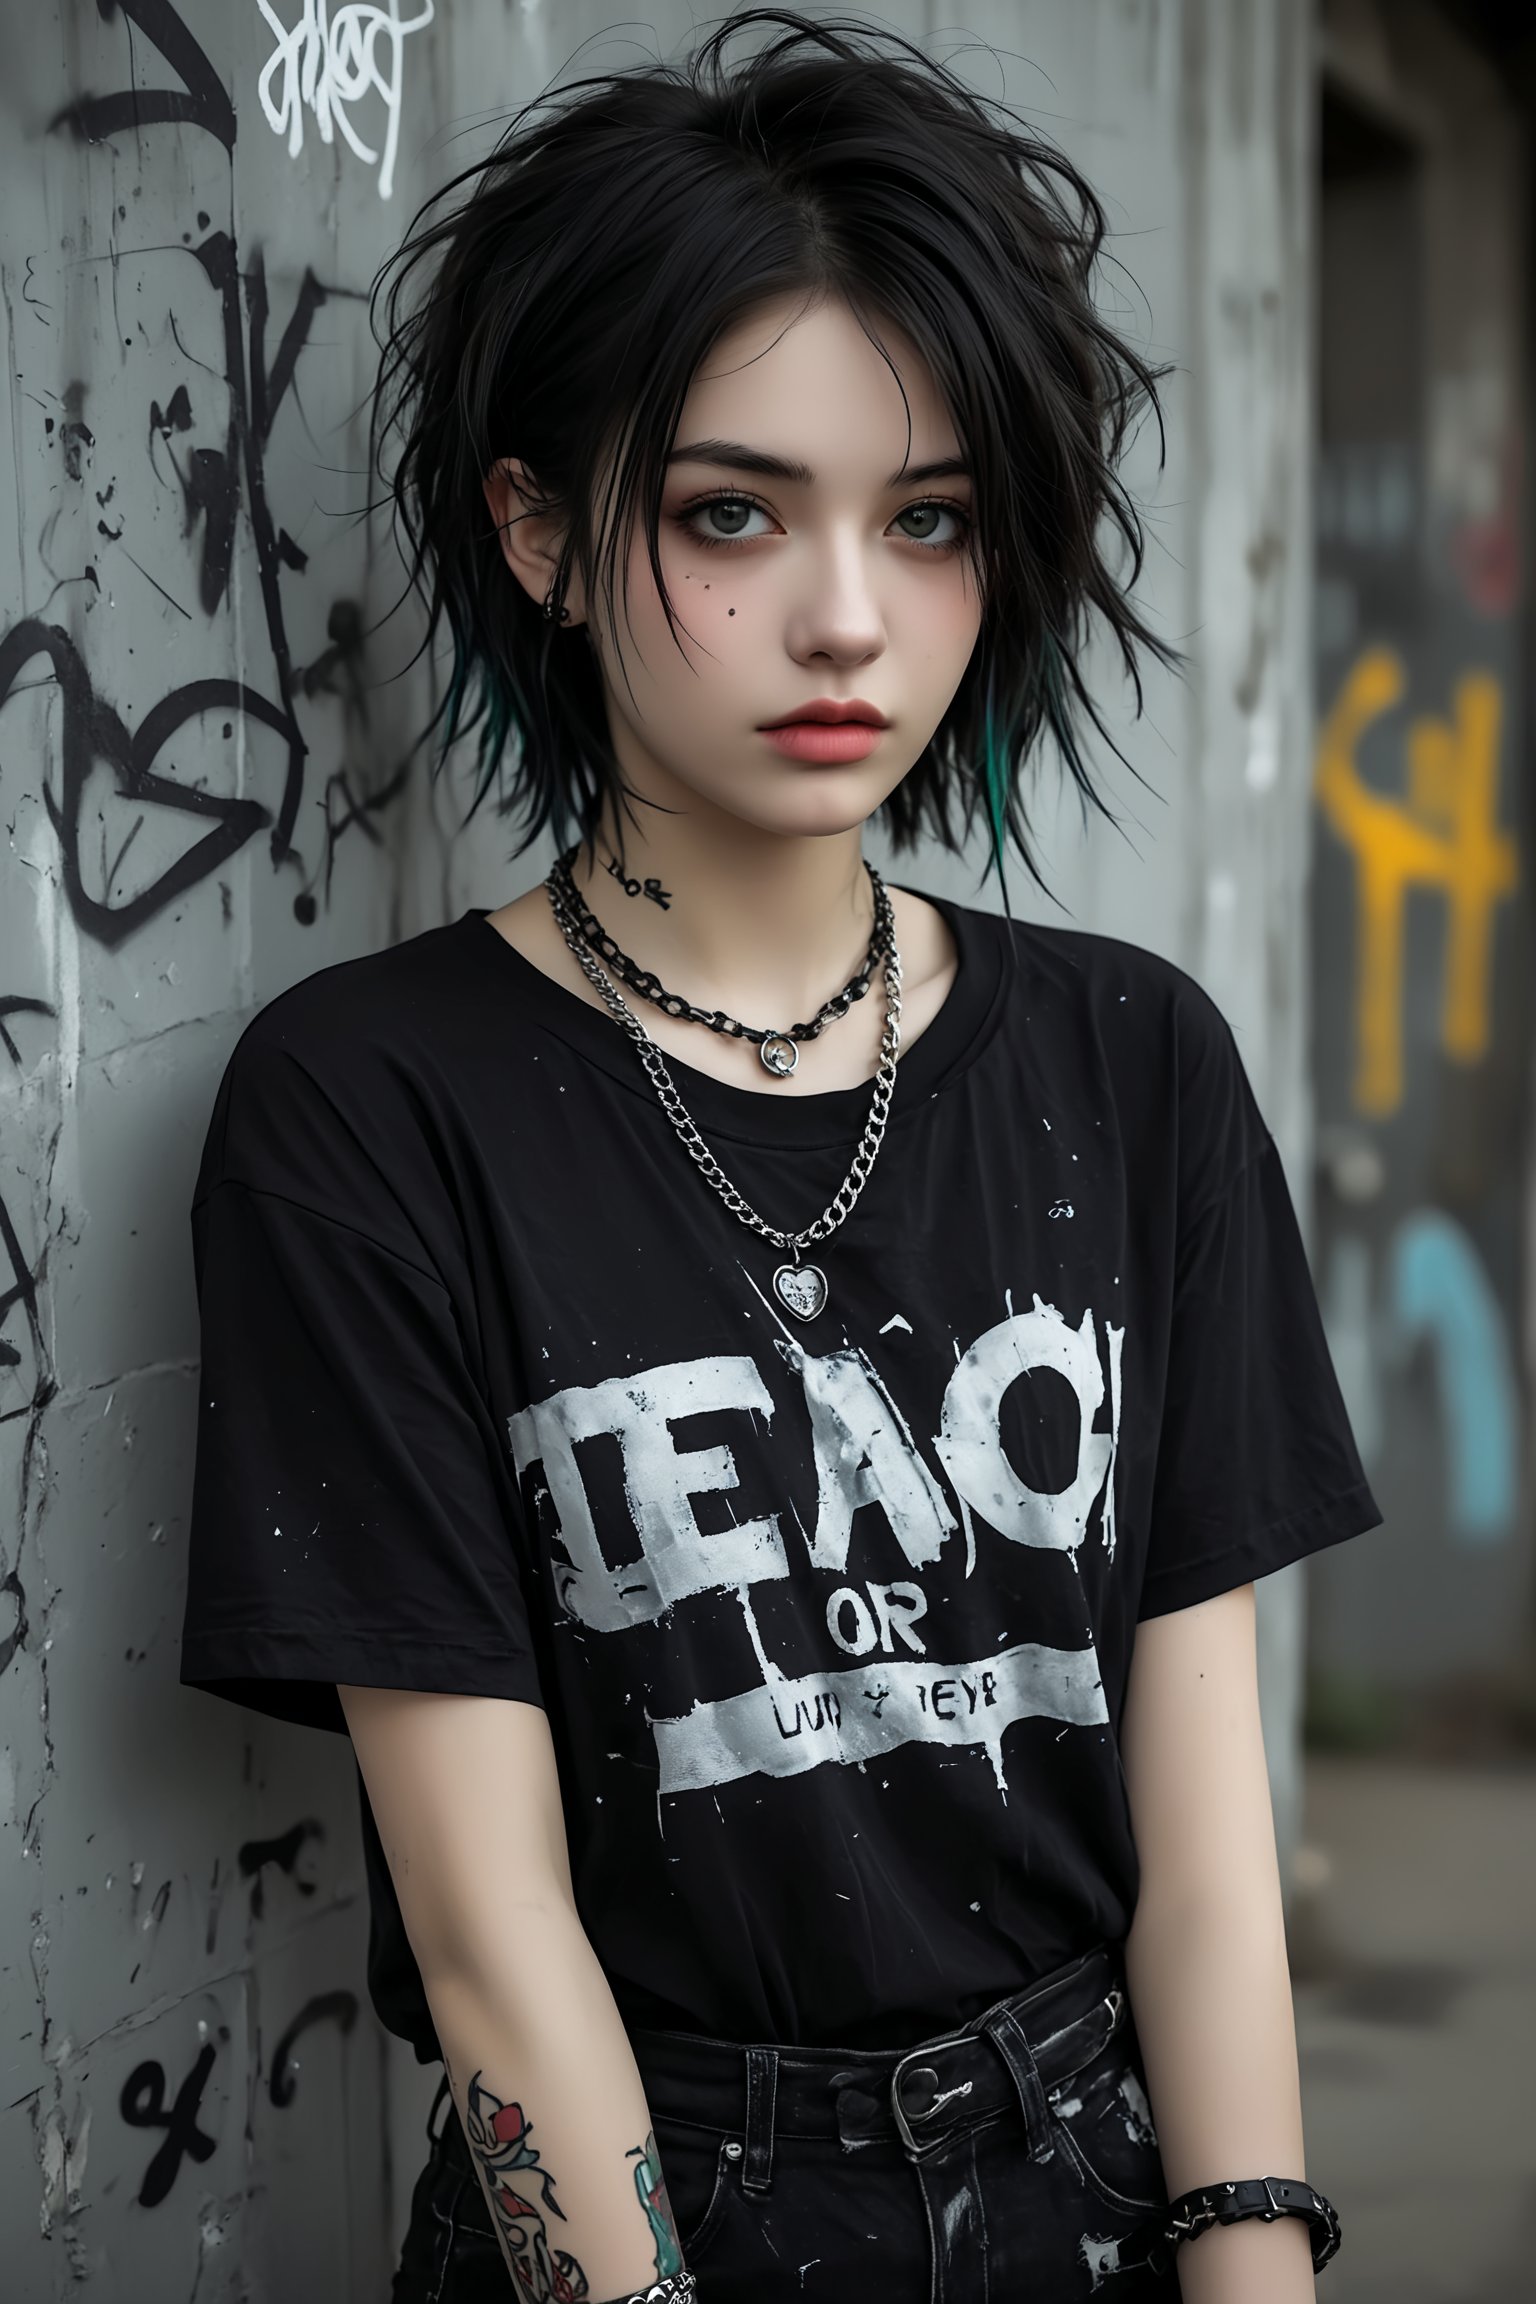 1 tomboy,Androgynous, boyish woman with emo-grunge fashion,Short tousled dark hair with colorful streaks. Striking features,goth makeup with dark eyeliner, Pale skin,ear piercings,
Outfit:Oversized distressed band t-shirt,Ripped black skinny jeans,Heavy combat boots,Layered silver necklaces and bracelets, slight smirk. Urban background, graffiti wall,
Style: High contrast photography, moody lighting. Gritty texture, desaturated colors except for hair highlights. Focus on subject's face and outfit details,goth girl,4k